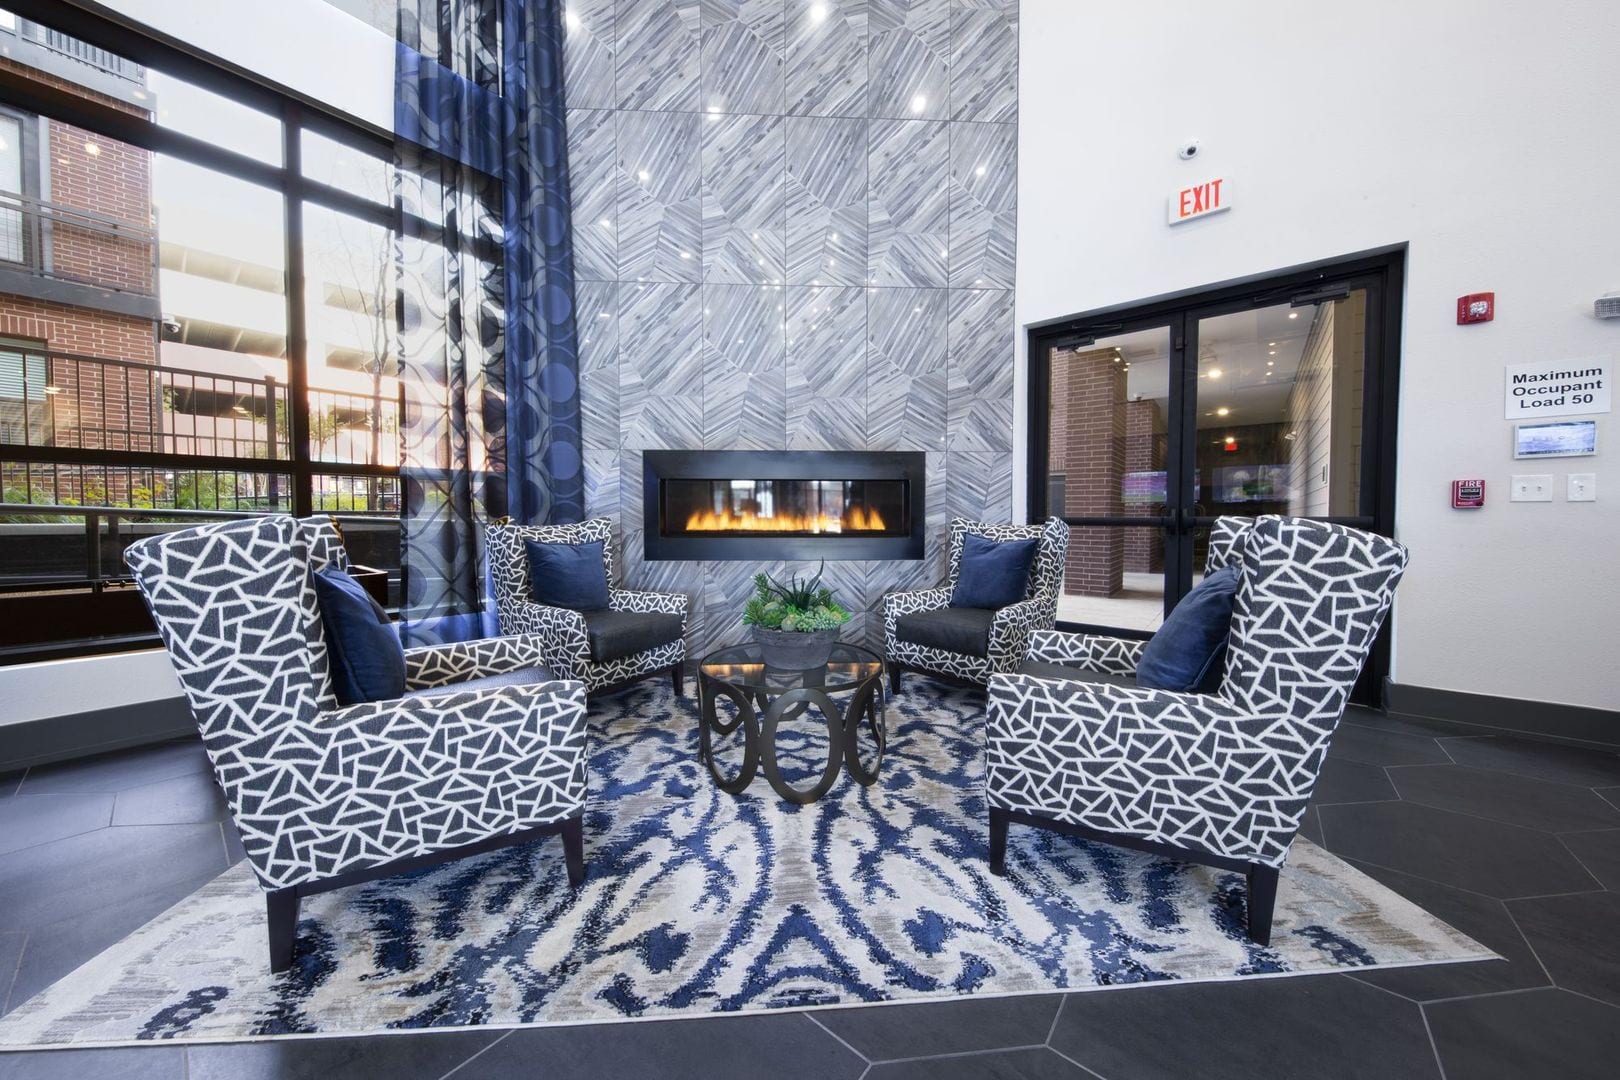 Sitting area in front of the gas fireplace in the stunning resident clubhouse at Steelyard in Oklahoma City, Oklahoma